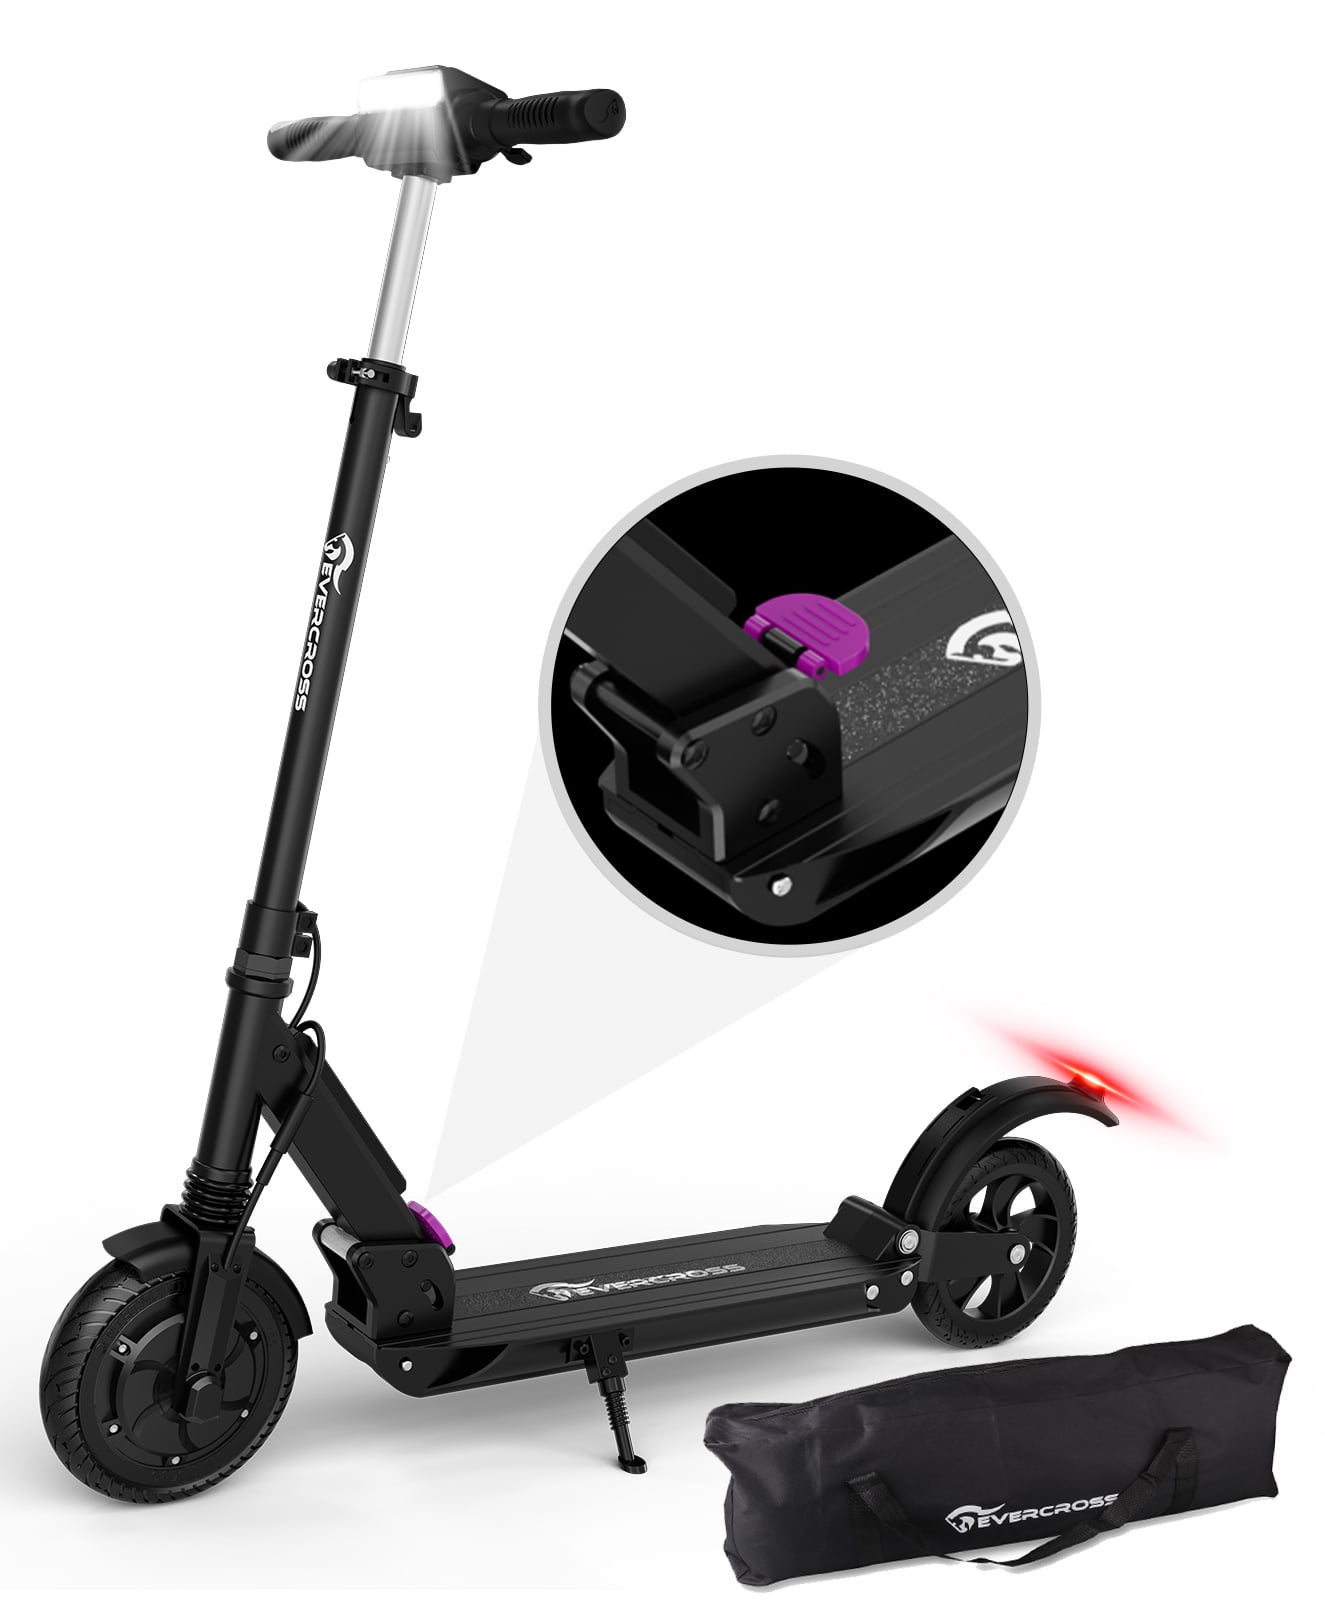 EVERCROSS Electric Scooter with 350W Motor, Up to 19 MPH and 20 